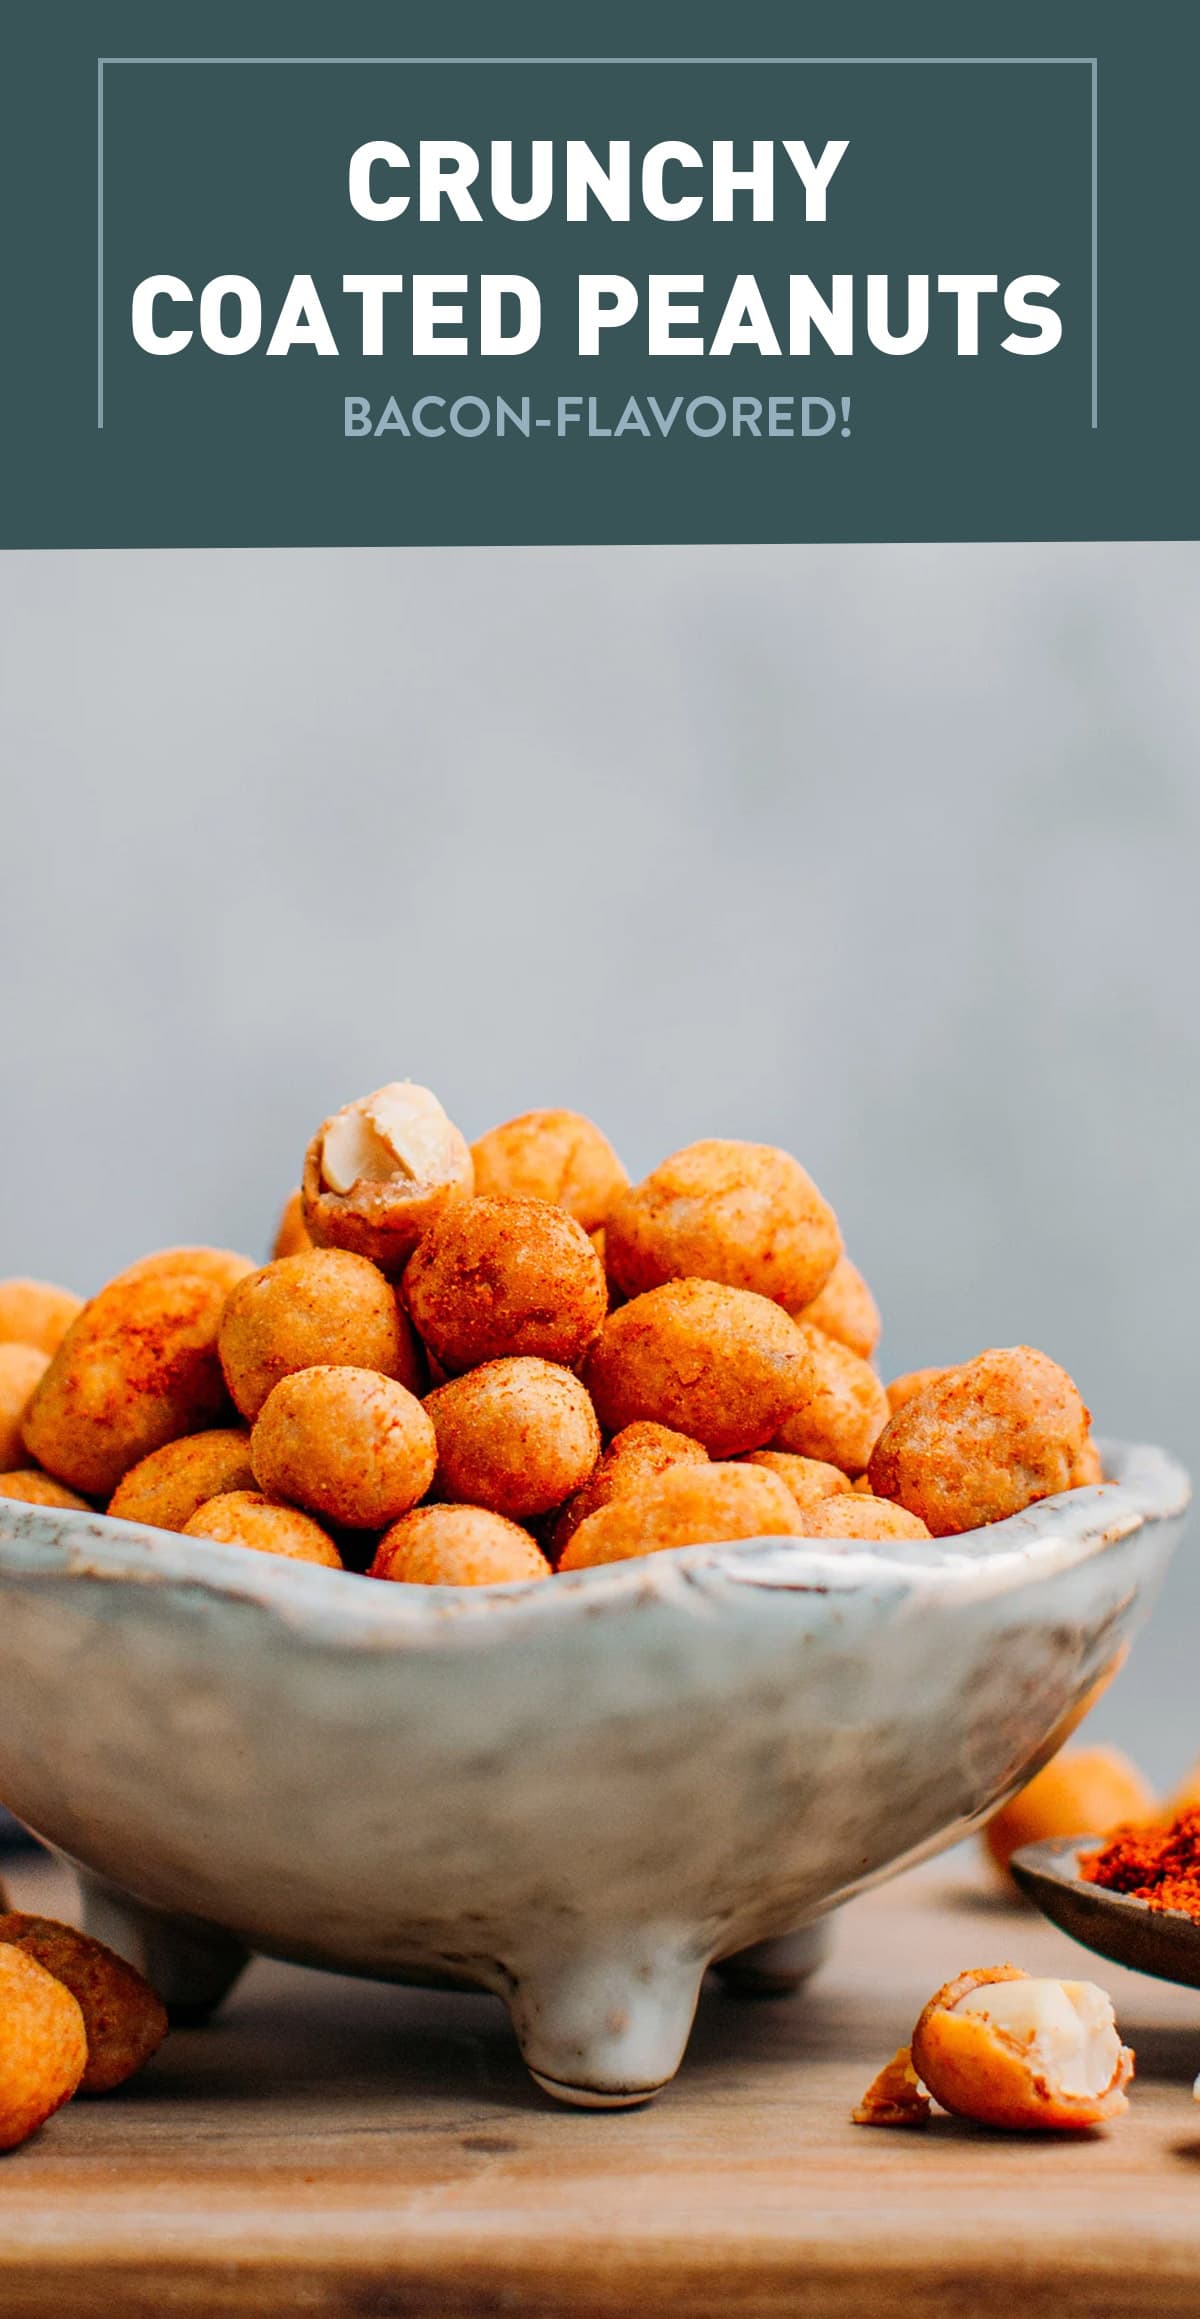 Super crunchy peanuts with a smoky and garlicky shell. These insanely-addicting peanuts make the perfect savory snack! #peanuts #vegan #plantbased